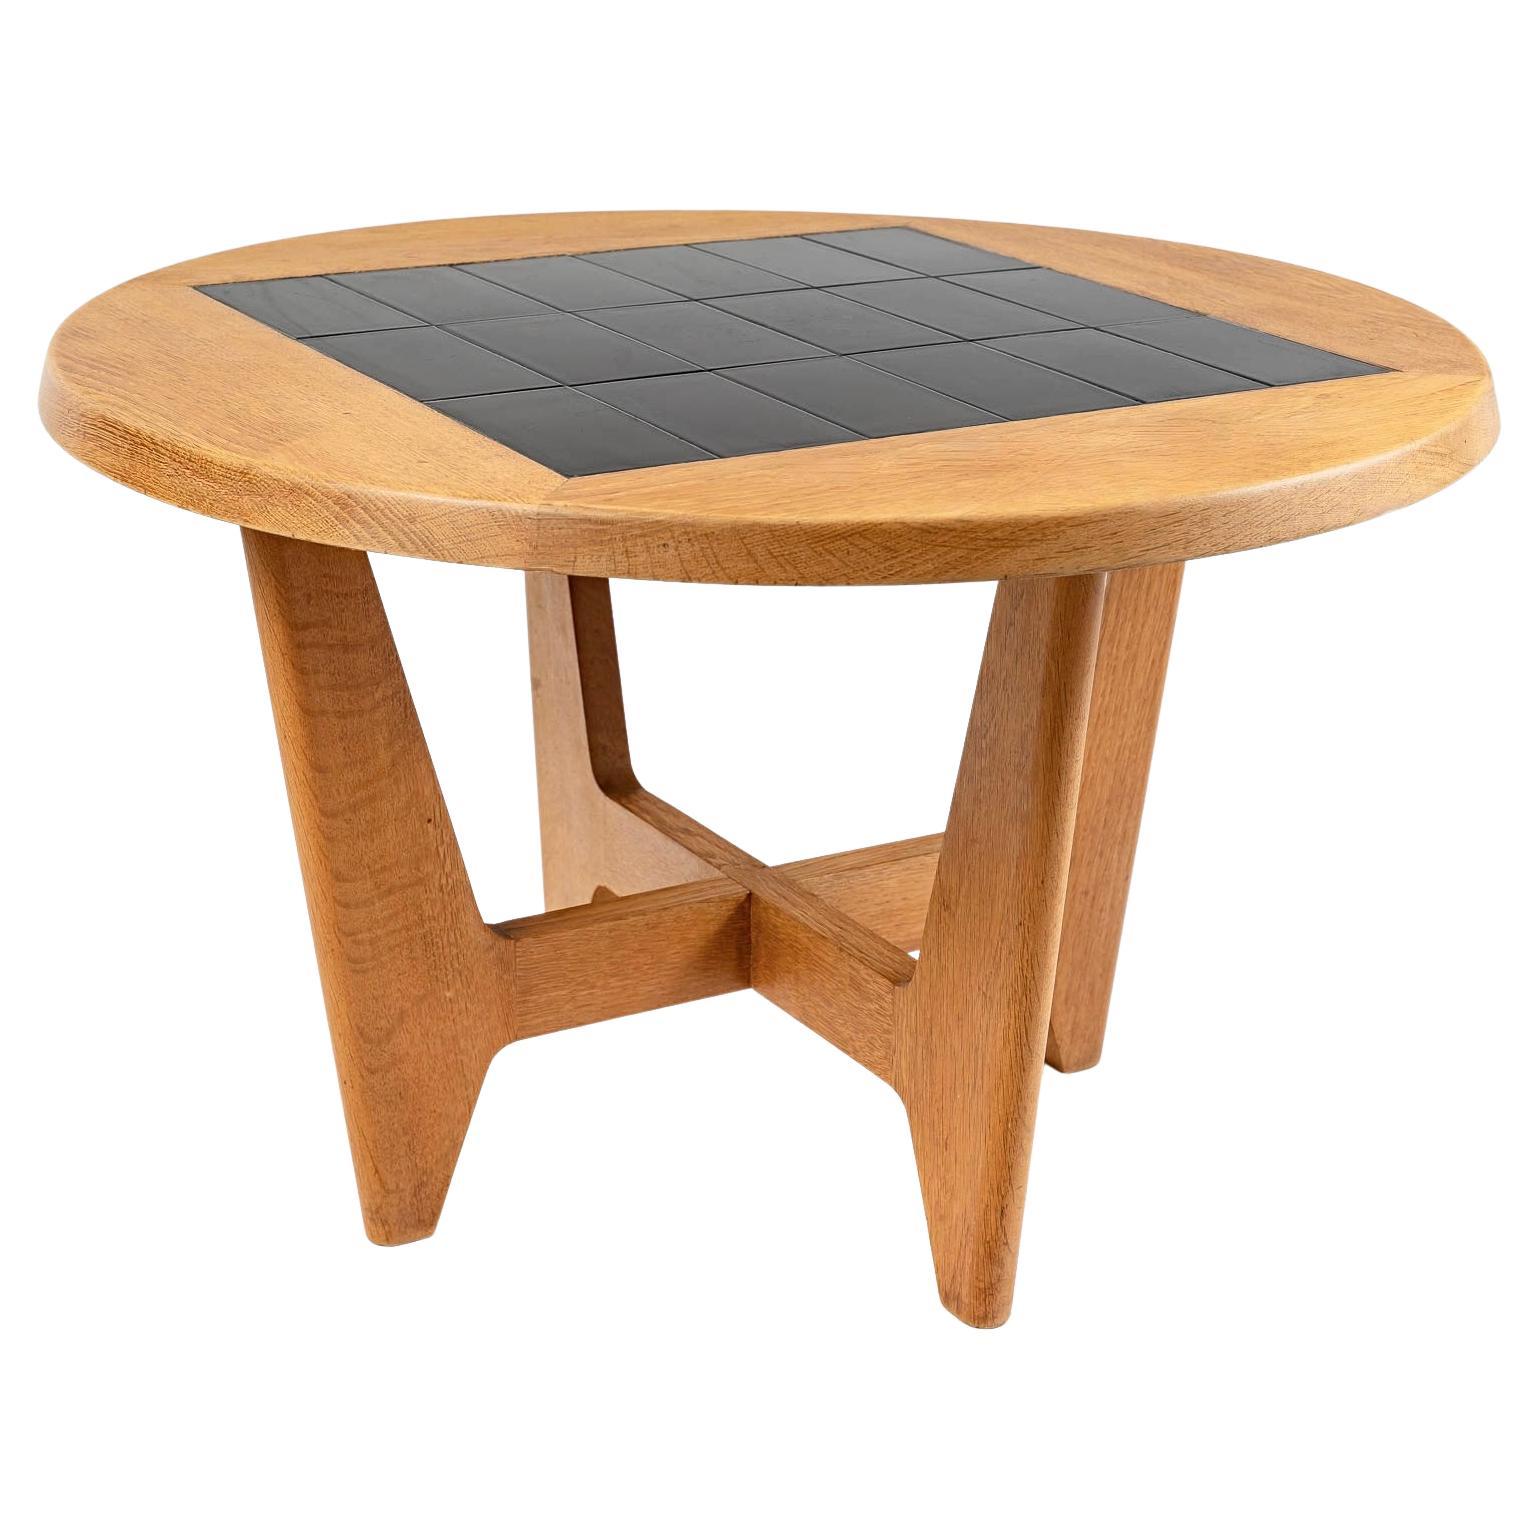 Pedestal table in natural oak by Guillerme et Chambron

Composed of a round top in natural oak with a sloping edge, it is decorated in the center with a square composed of a series of black tiles.
The tray is placed on a base composed of 4